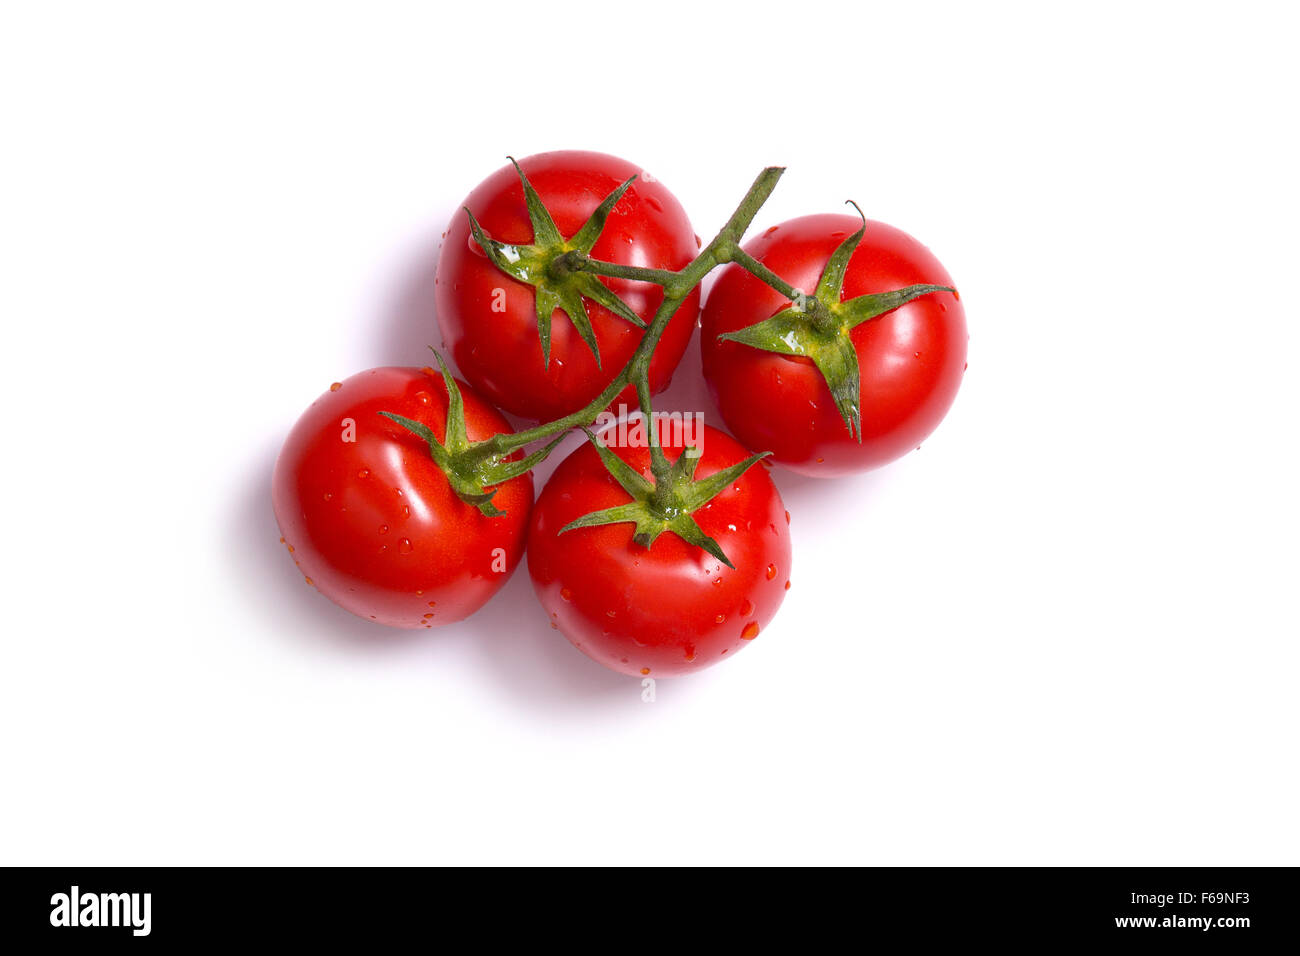 Top view on bunch of fresh tomatoes, isolated on white background Stock Photo